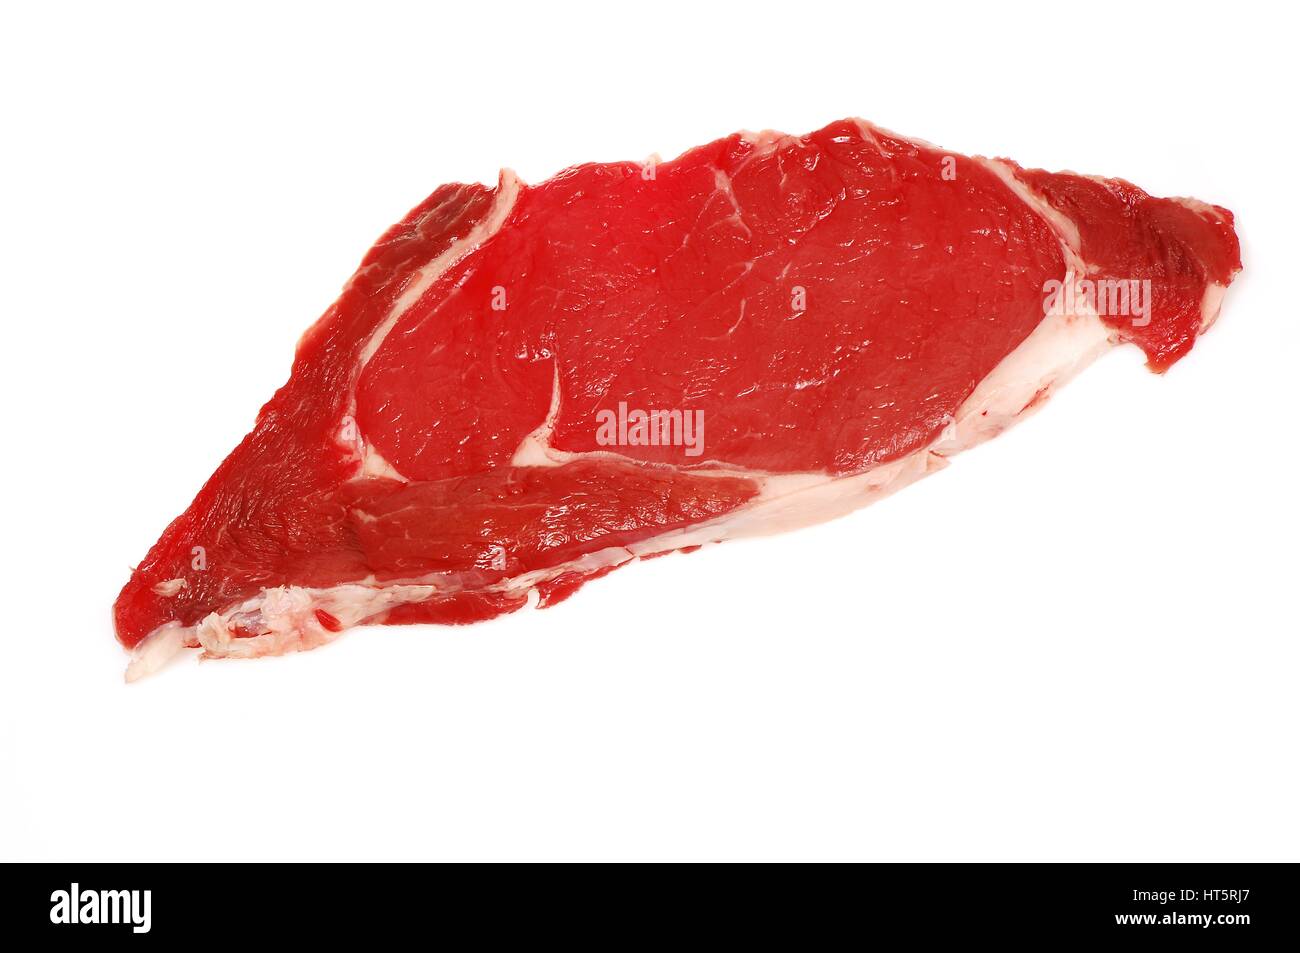 Raw beef meat steak isolated on white background Stock Photo